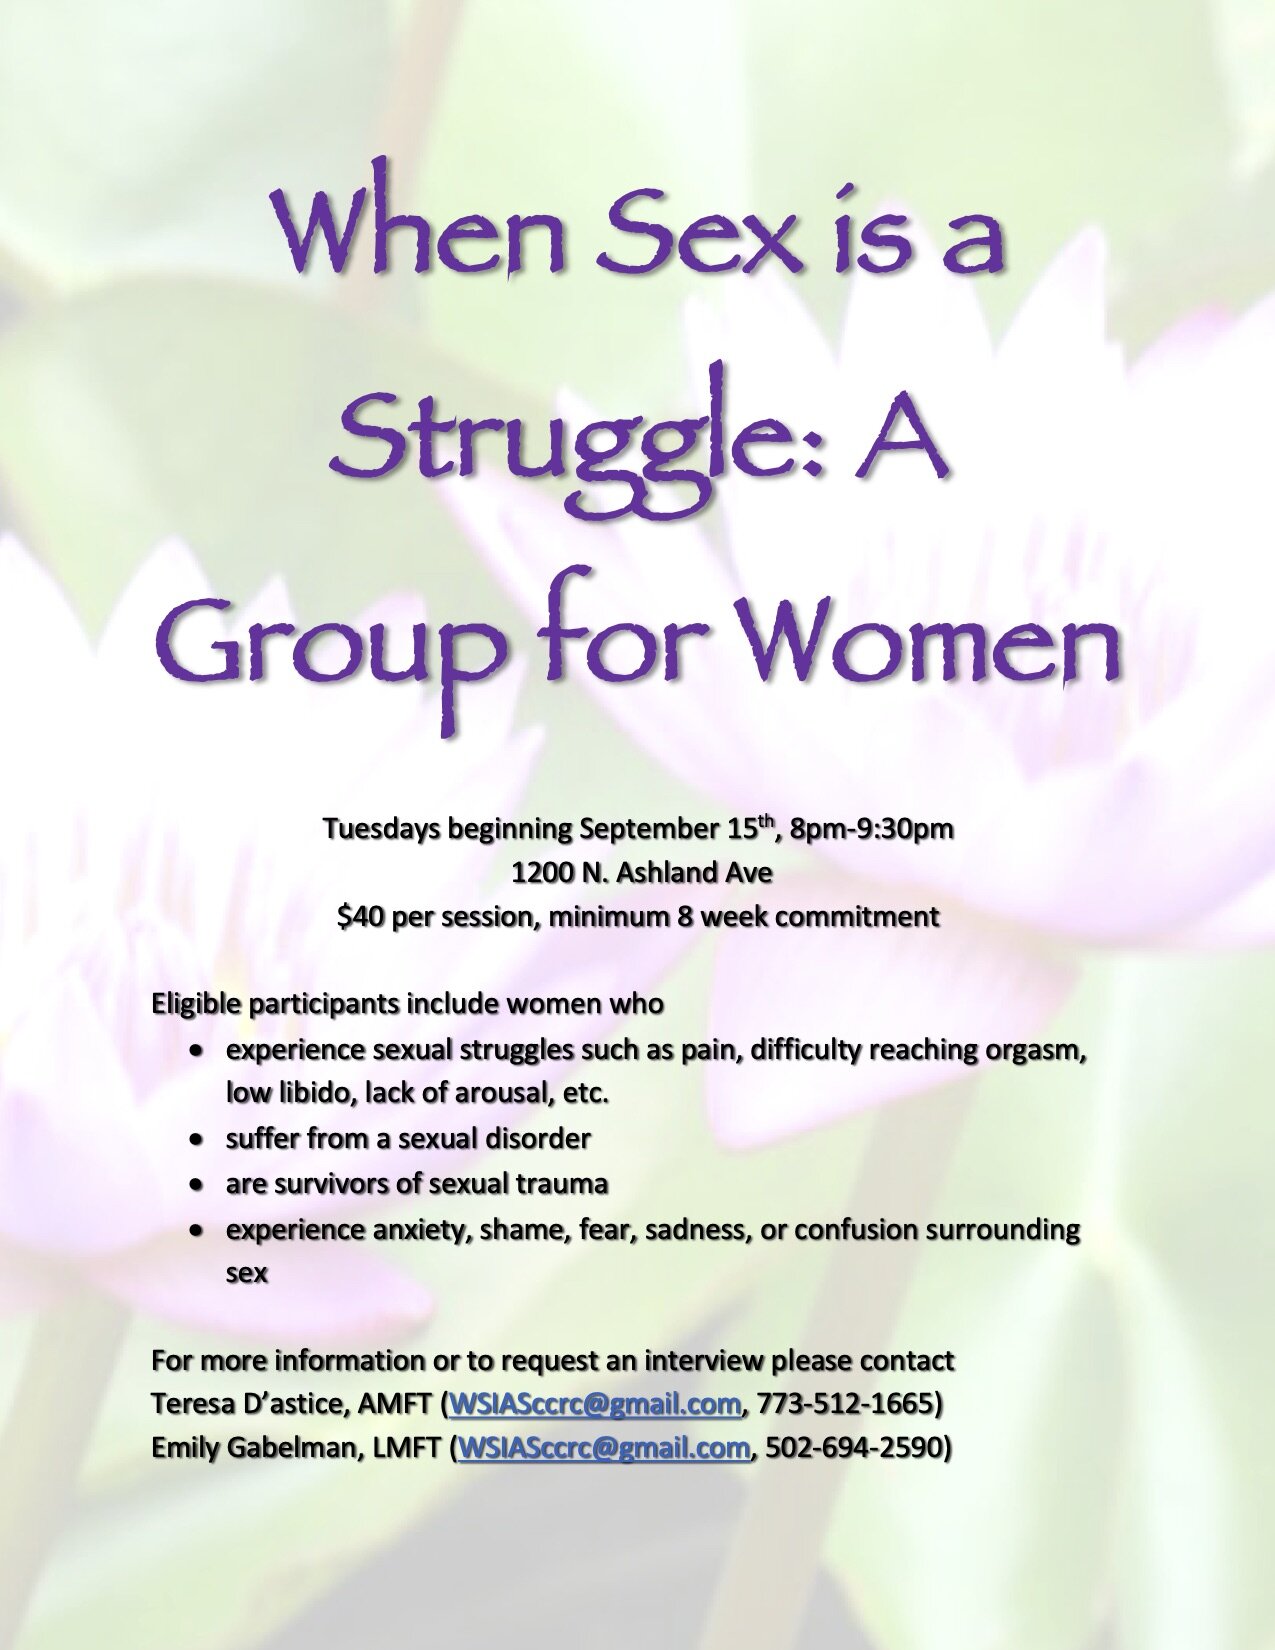 New Upcoming Group for Women When Sex is a Struggle — Chicago Center for Relationship Counseling